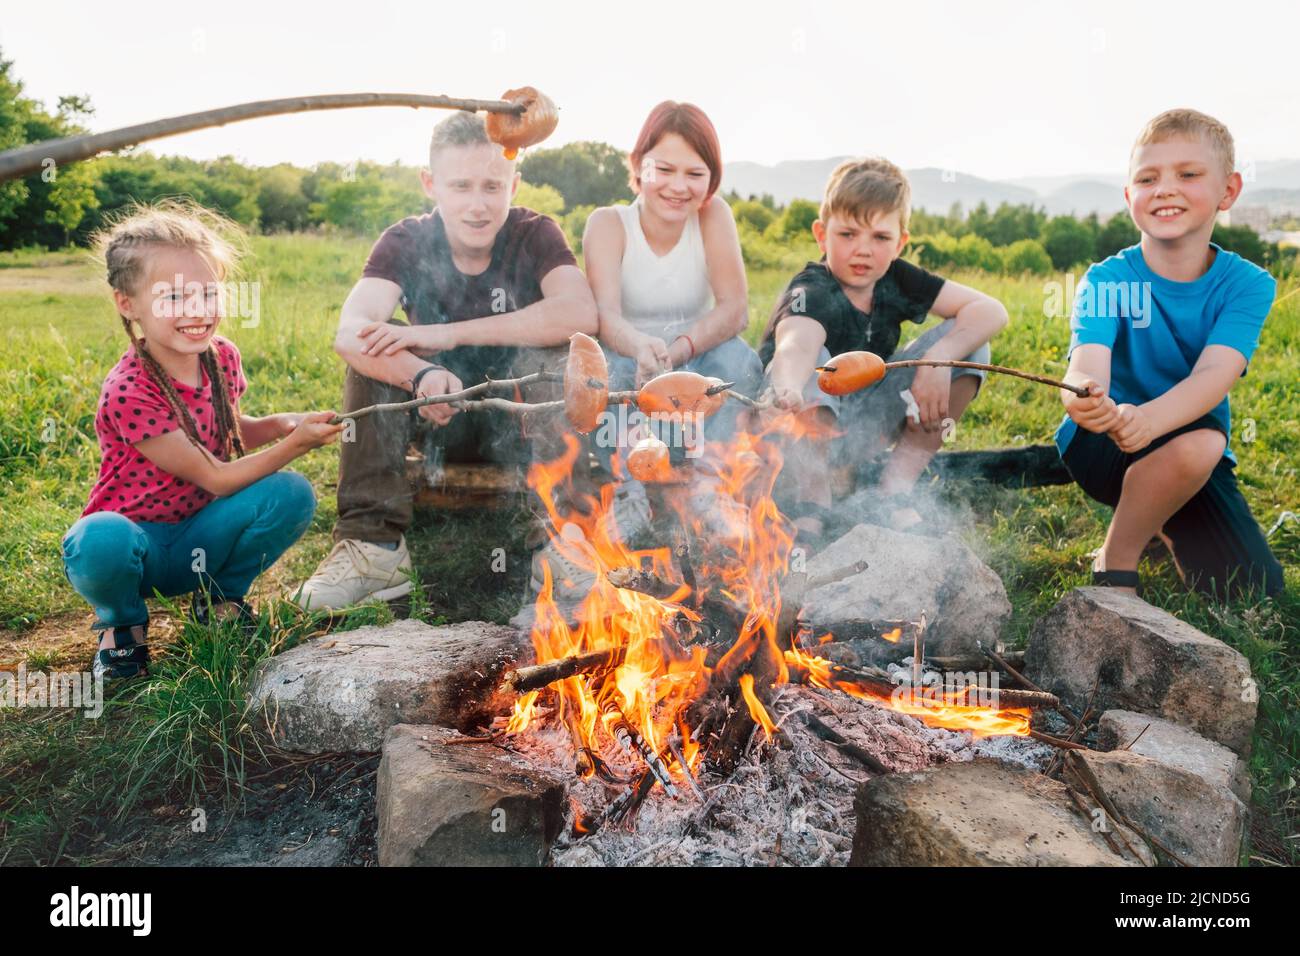 Group of Kids - Boys and girls cheerfully smiling and roasting sausages on sticks over a campfire flame Sausages selective focus. Outdoor active time Stock Photo